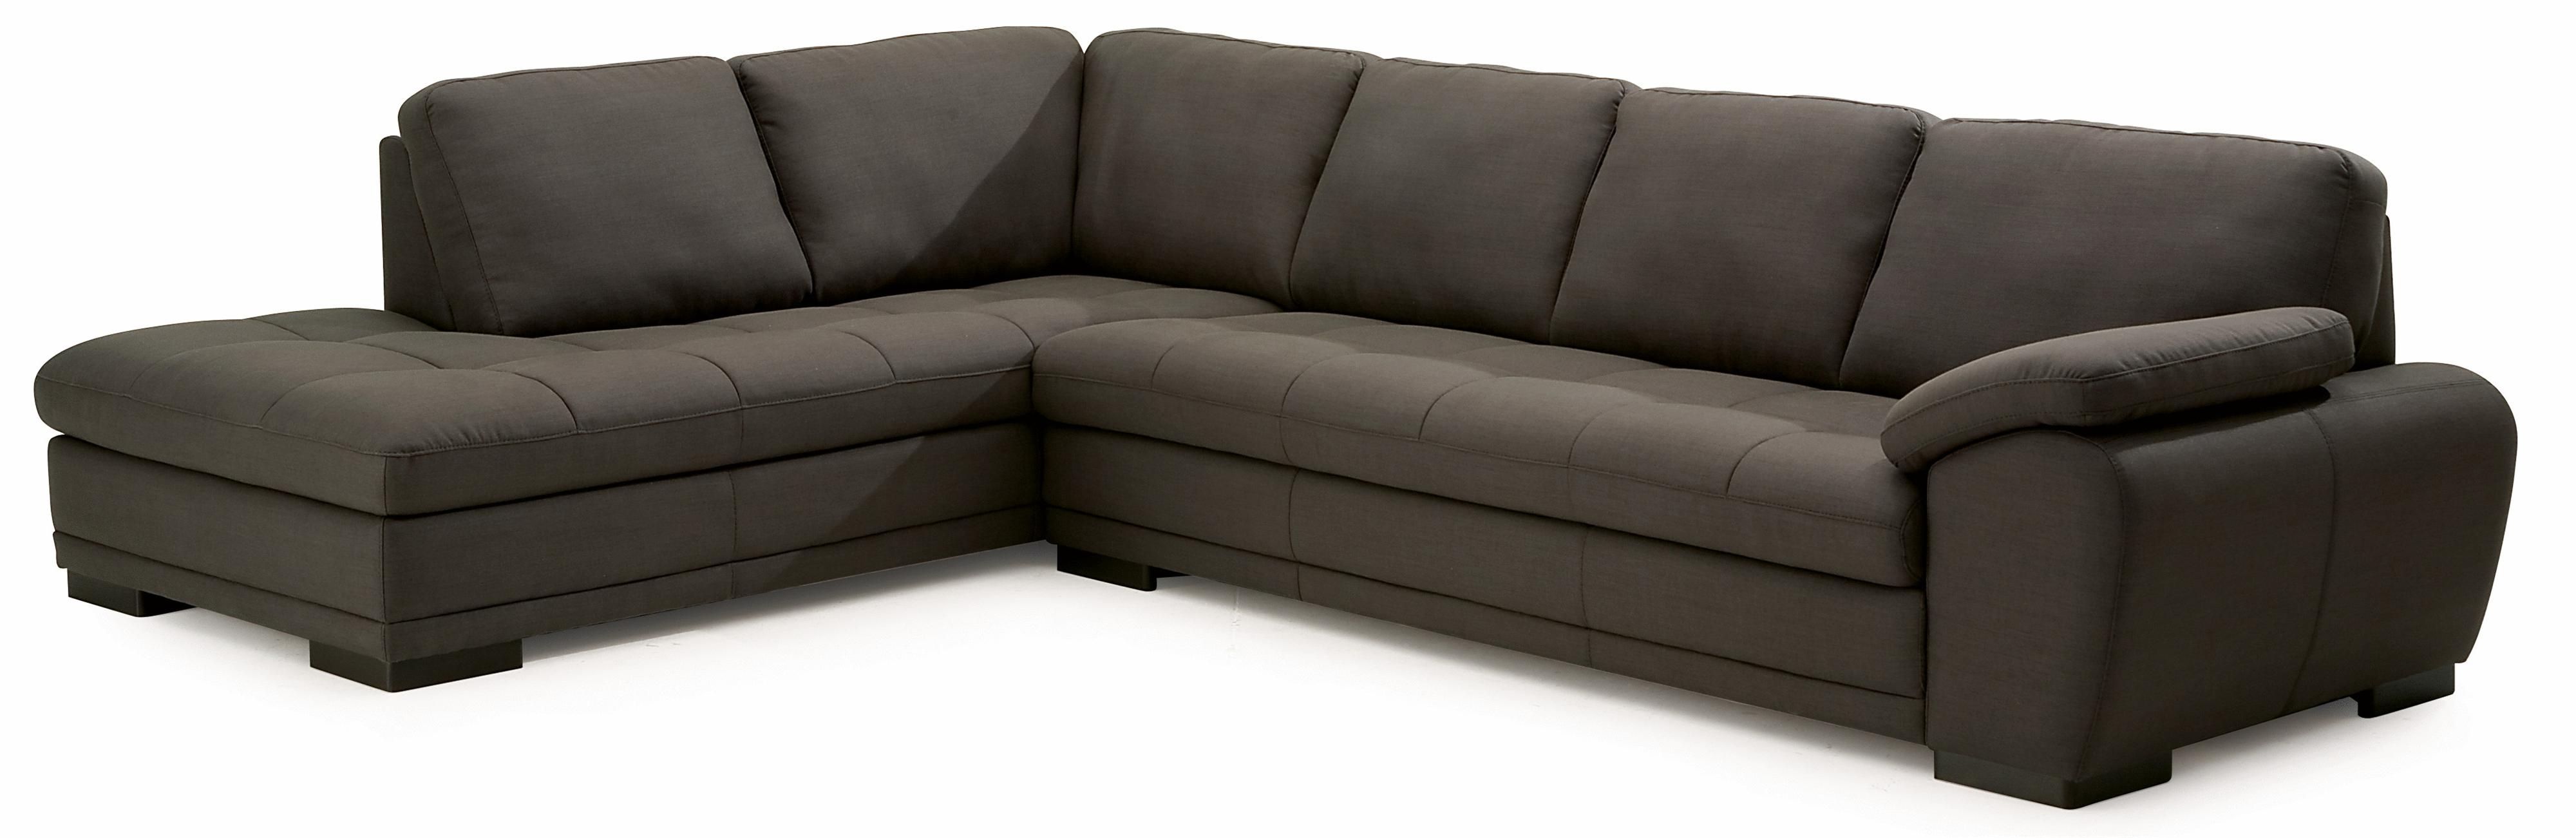 Well Liked Palliser Miami Contemporary 2 Piece Sectional Sofa With Right Intended For El Dorado Sectional Sofas (View 20 of 20)